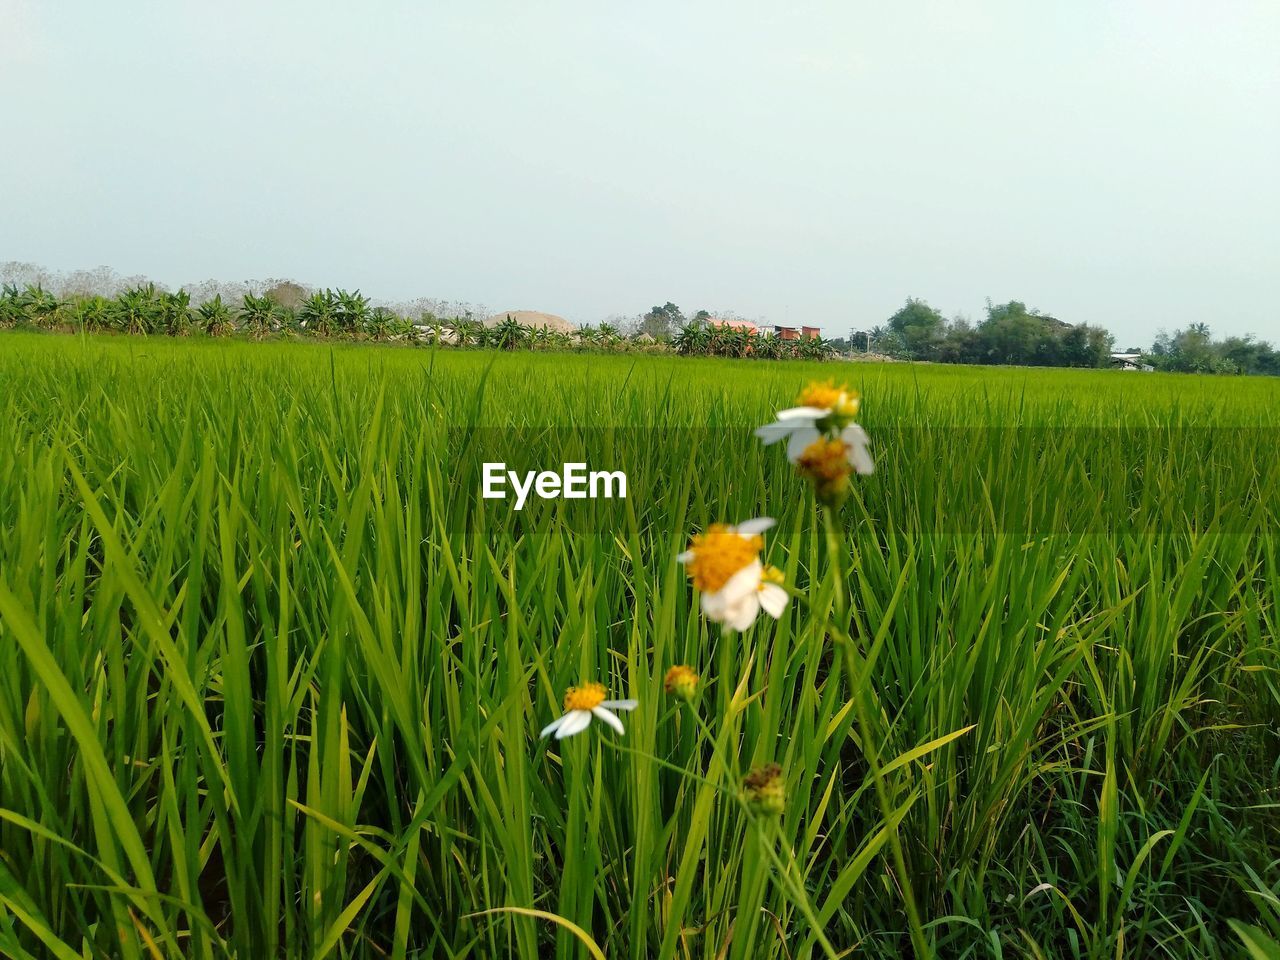 VIEW OF FLOWERING PLANT ON FIELD